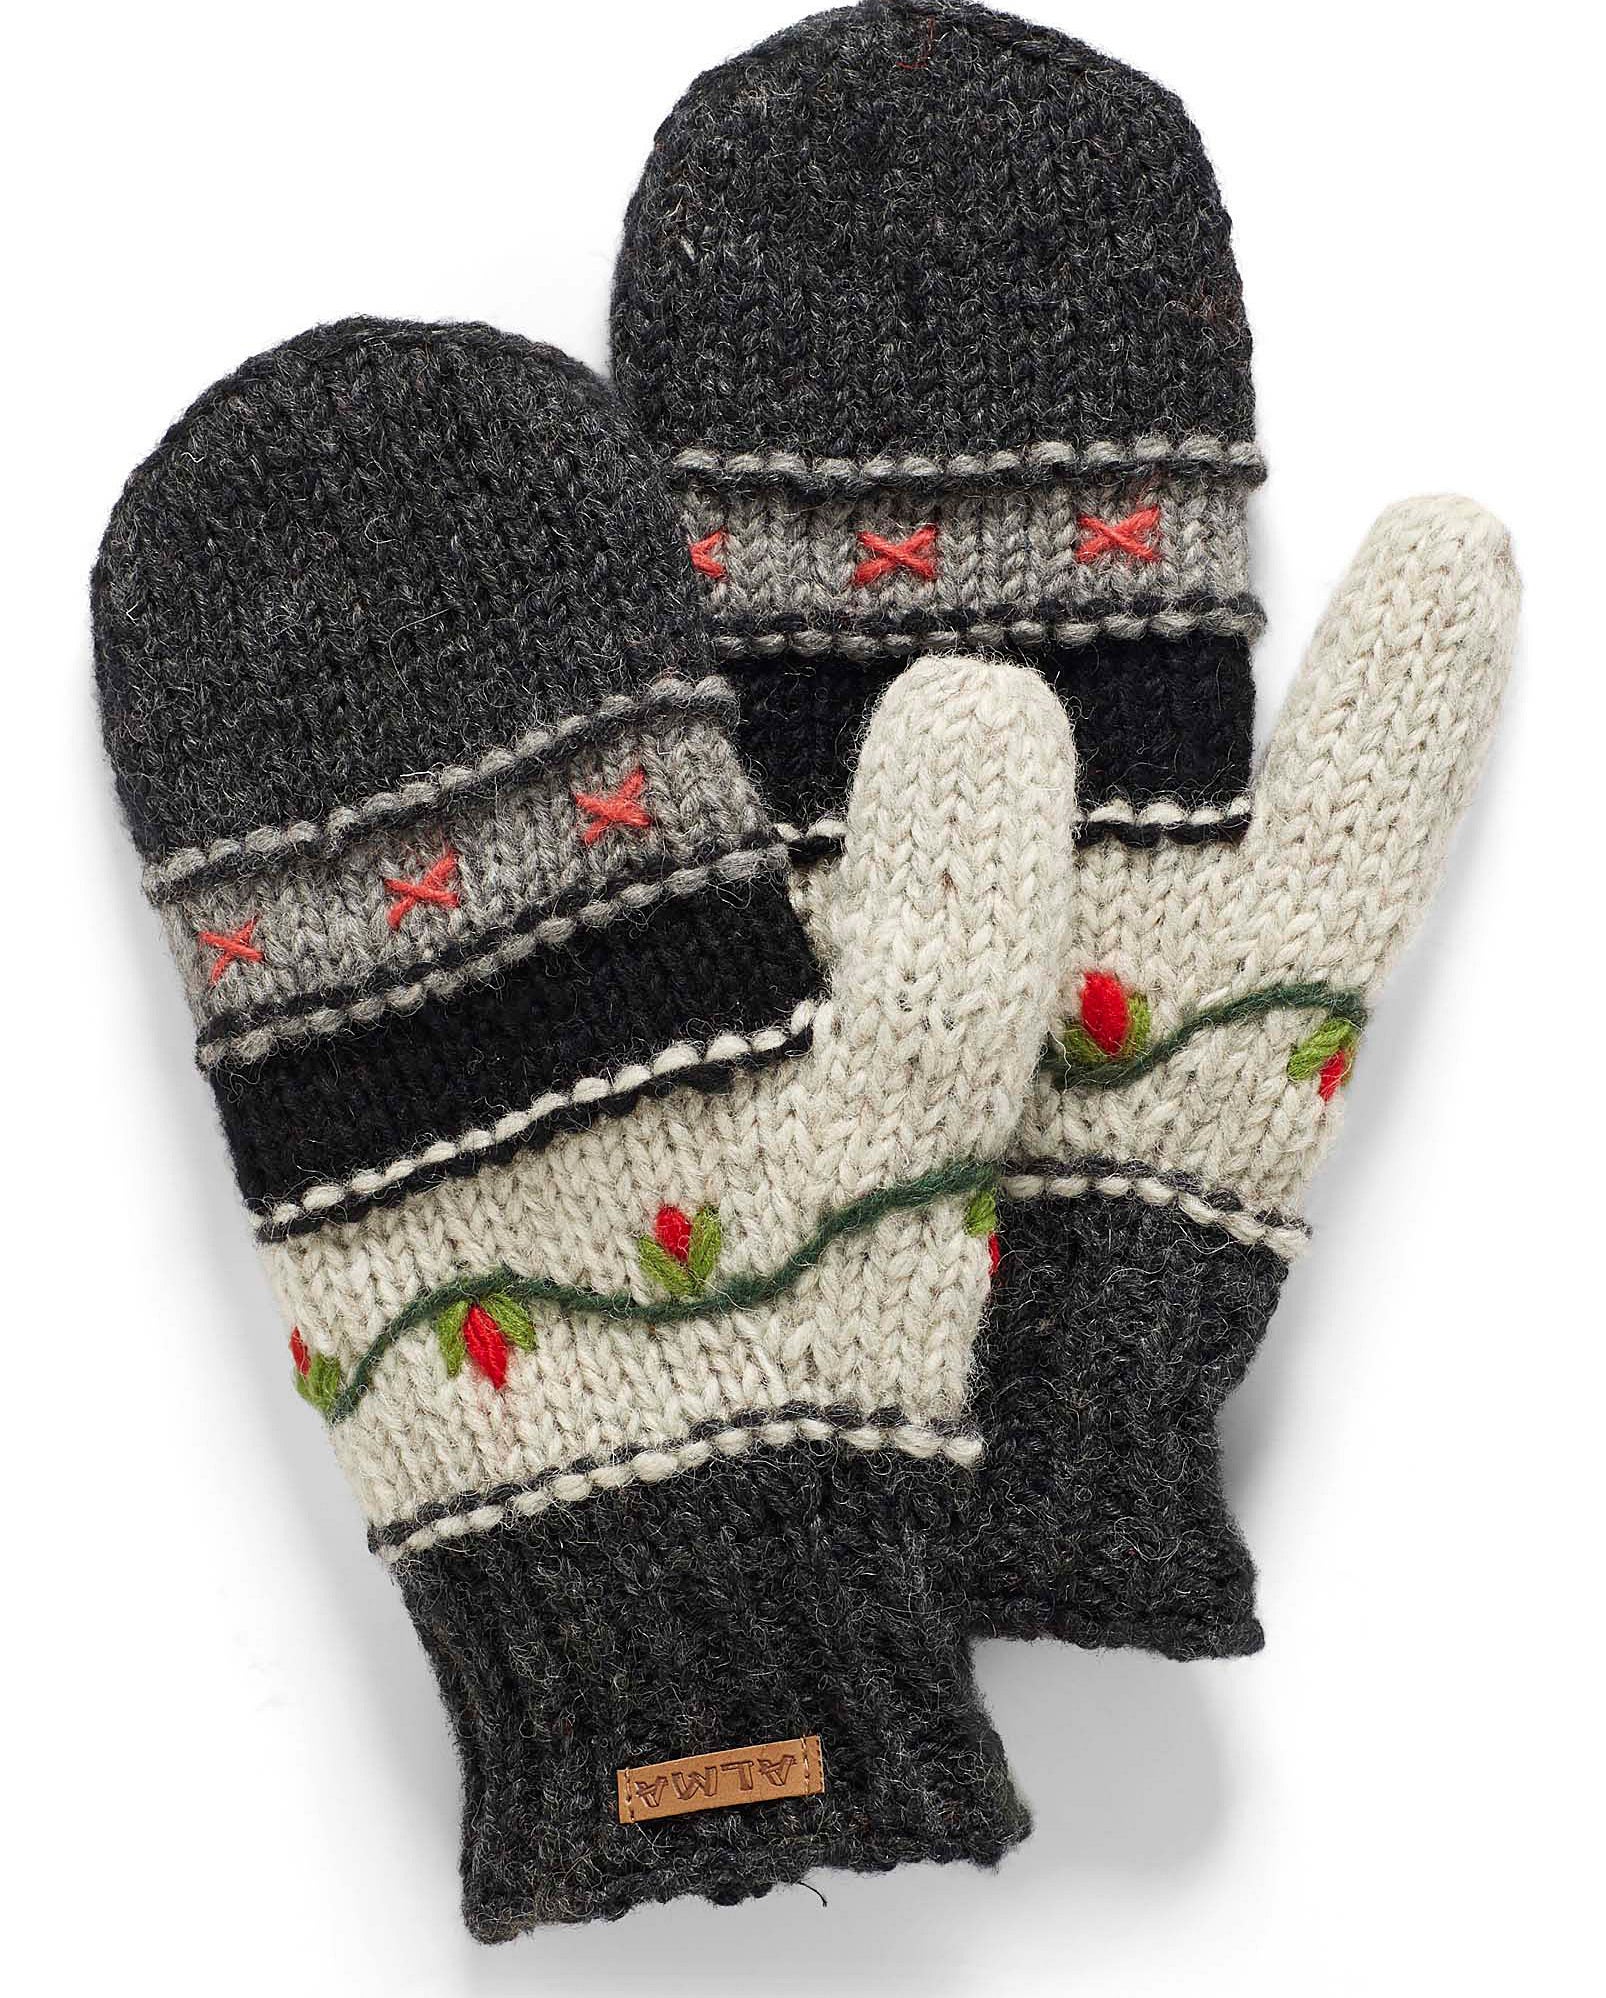 A pair of knit mittens with floral embroidery